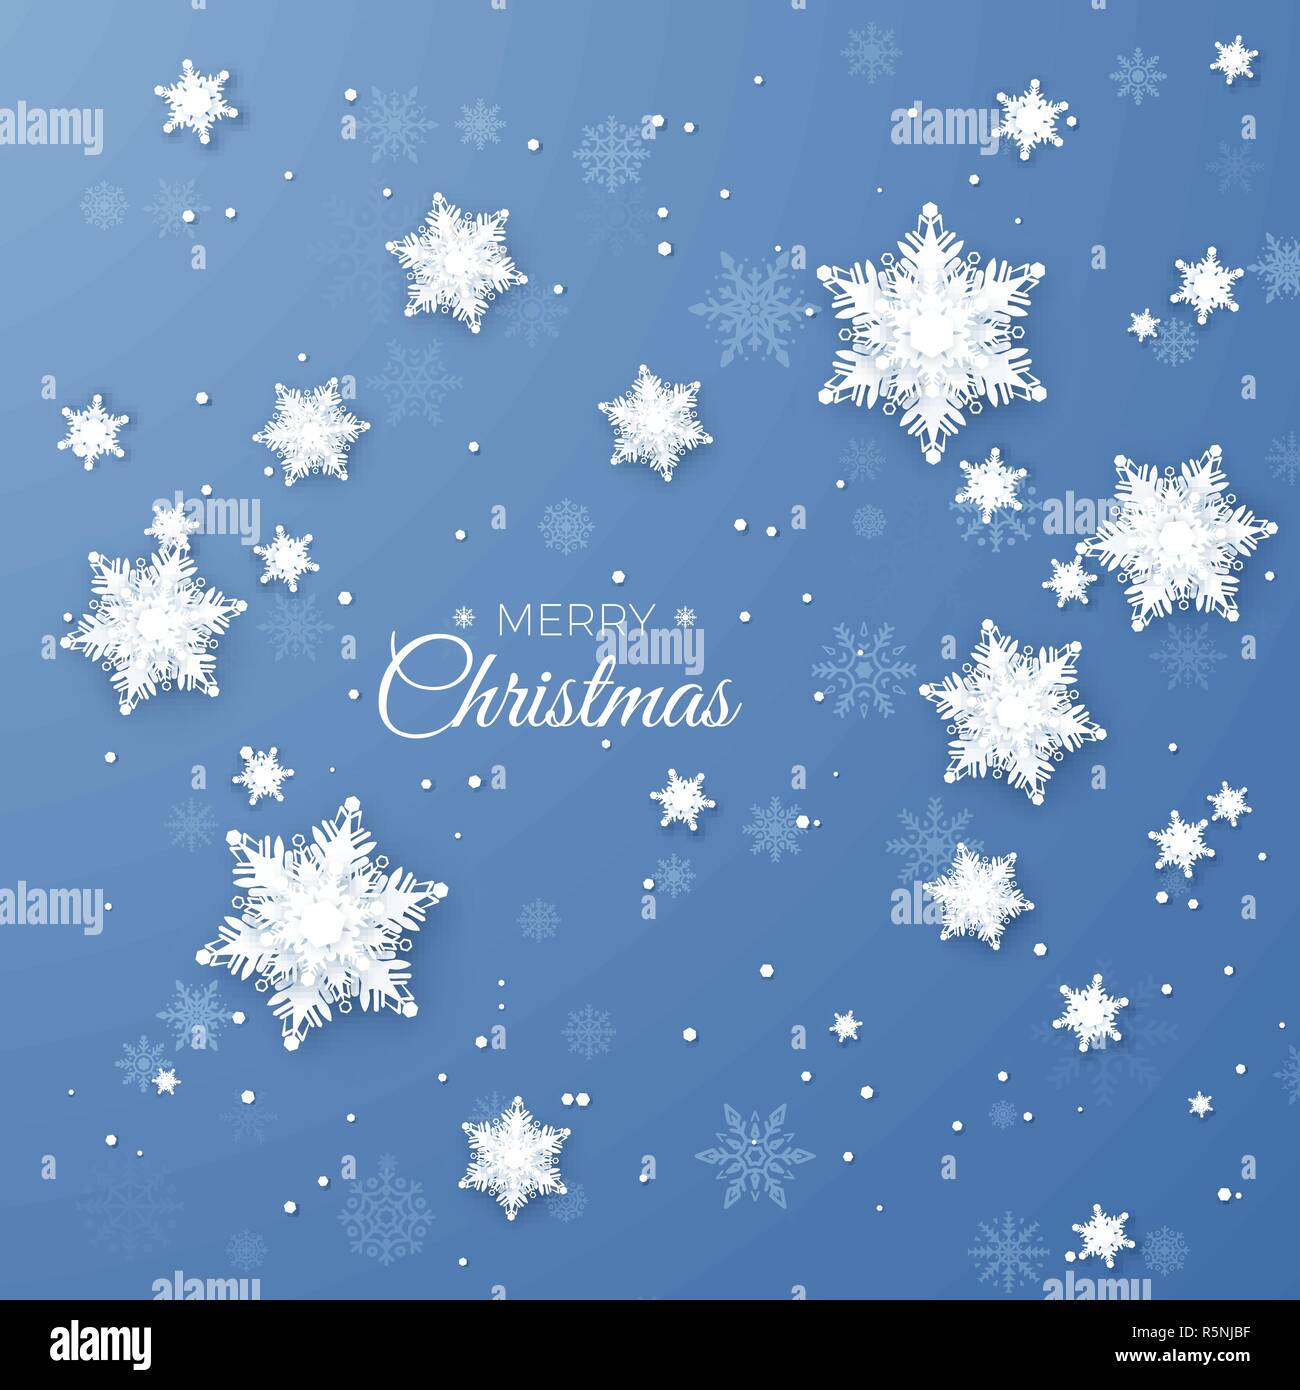 Merry Christmas greeting illustration. Paper Snowflakes pattern background. Origami snowfall. Winter snowflakes background. Holidays decoration elemen Stock Vector